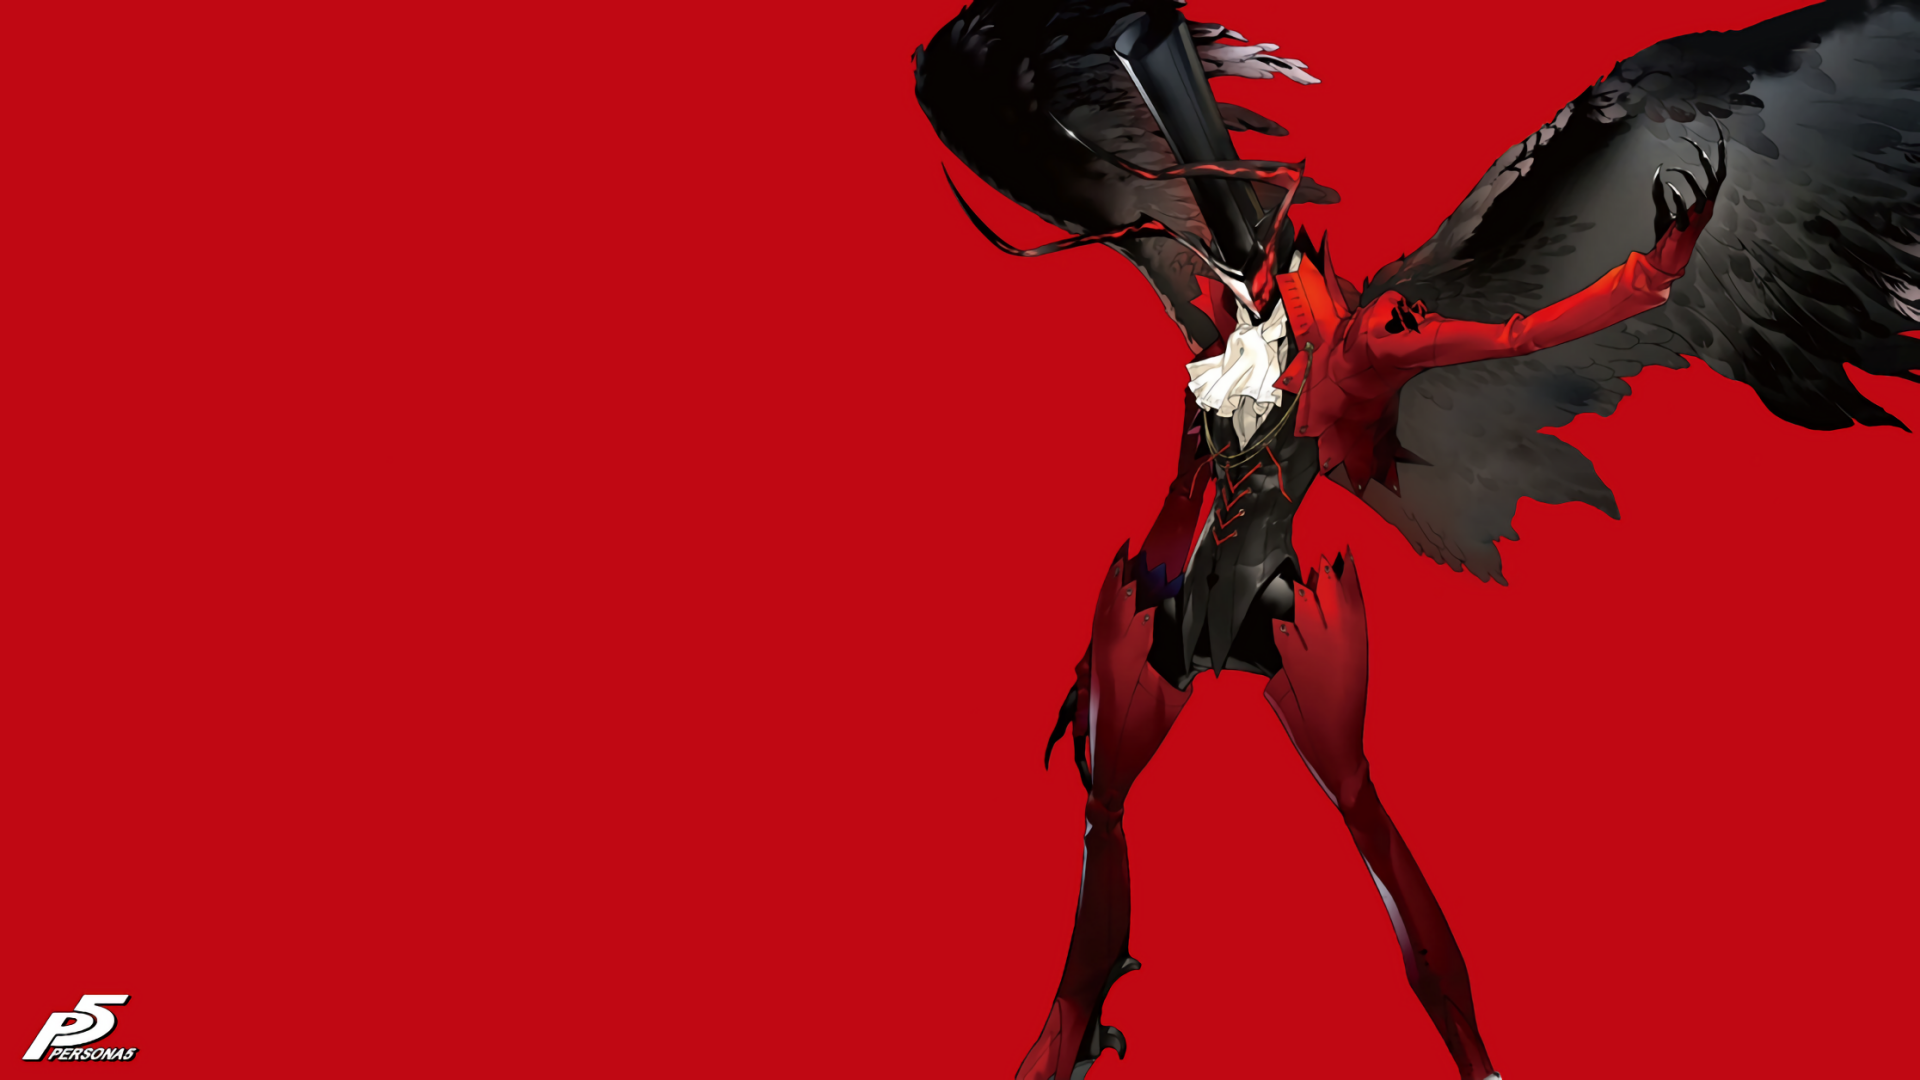 persona 5 iphone wallpaper,red,fictional character,demon,cg artwork,spawn